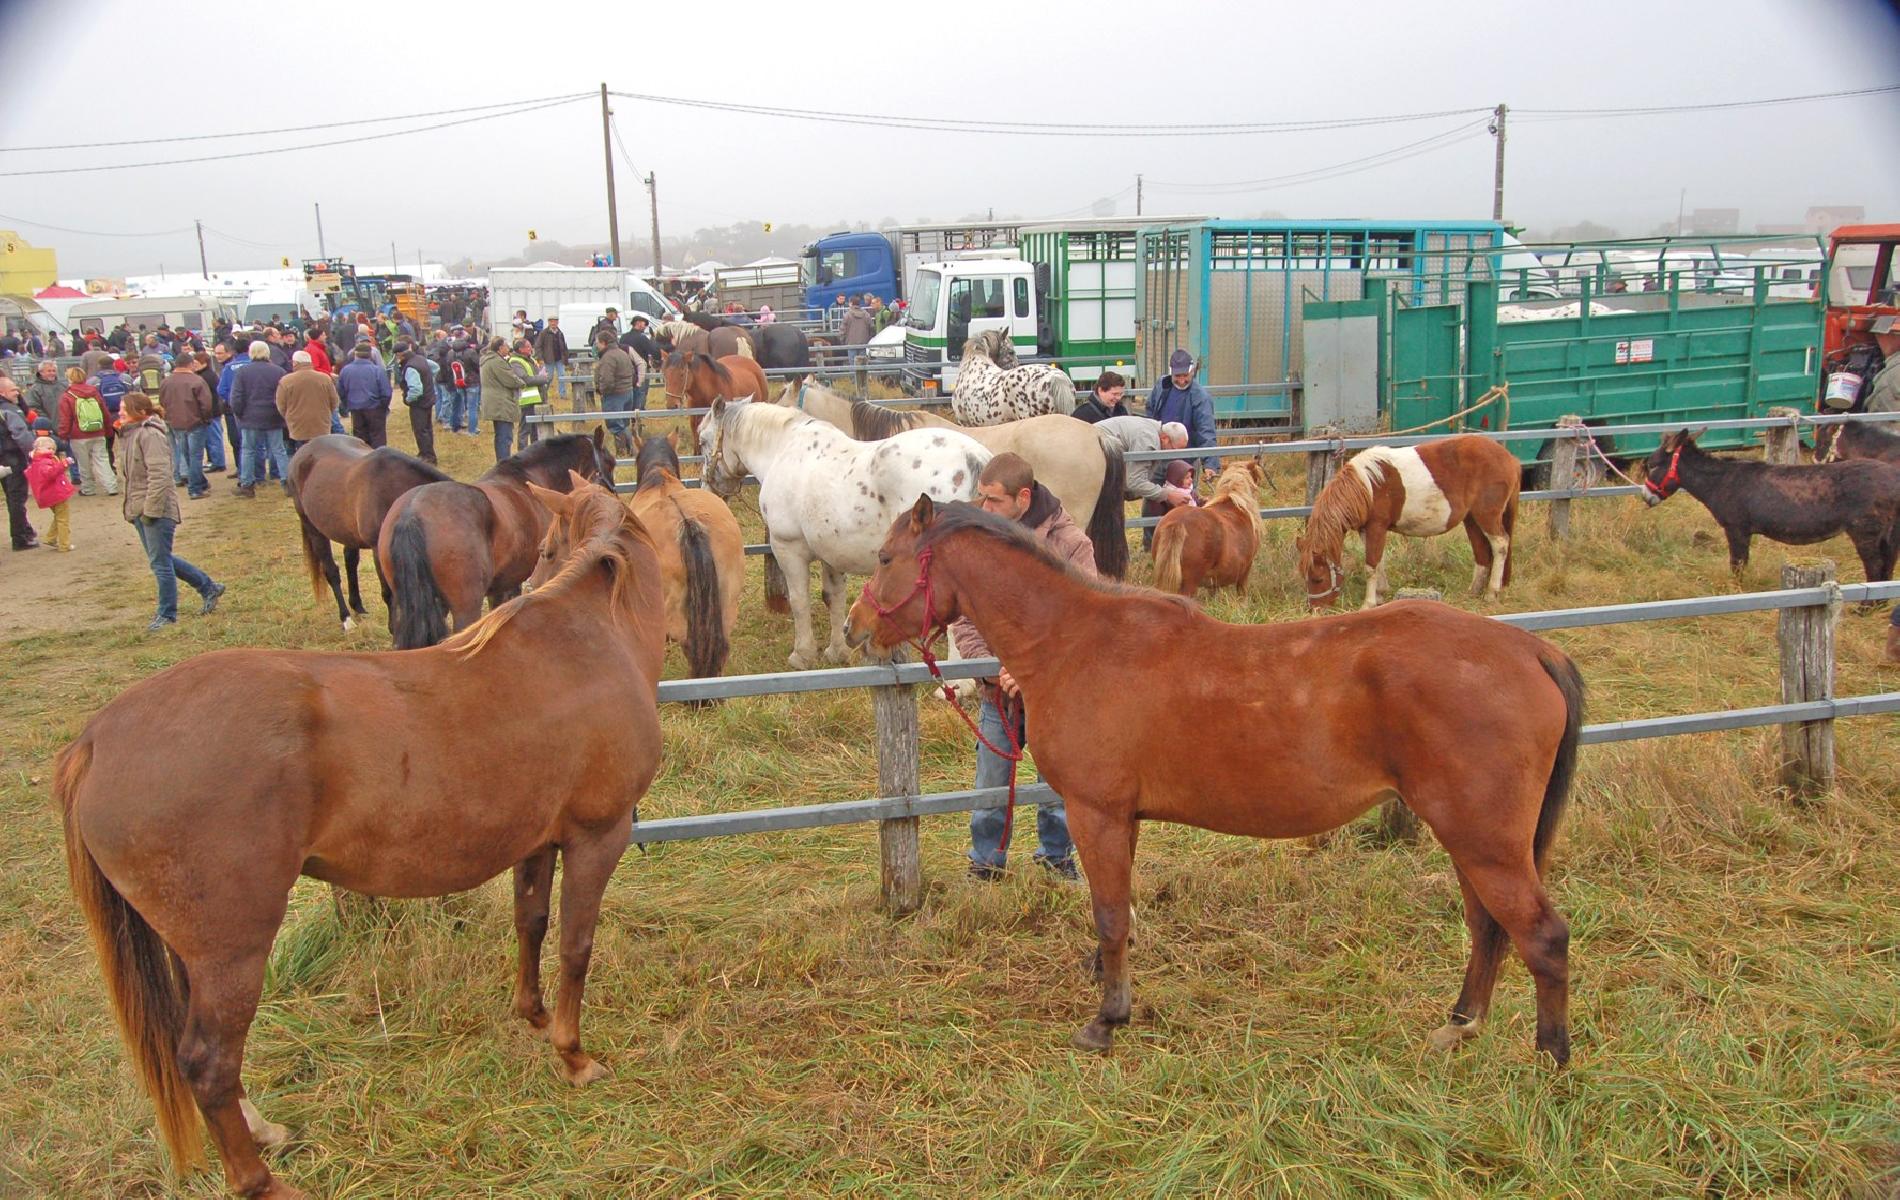 The agricultural fair of Poussay